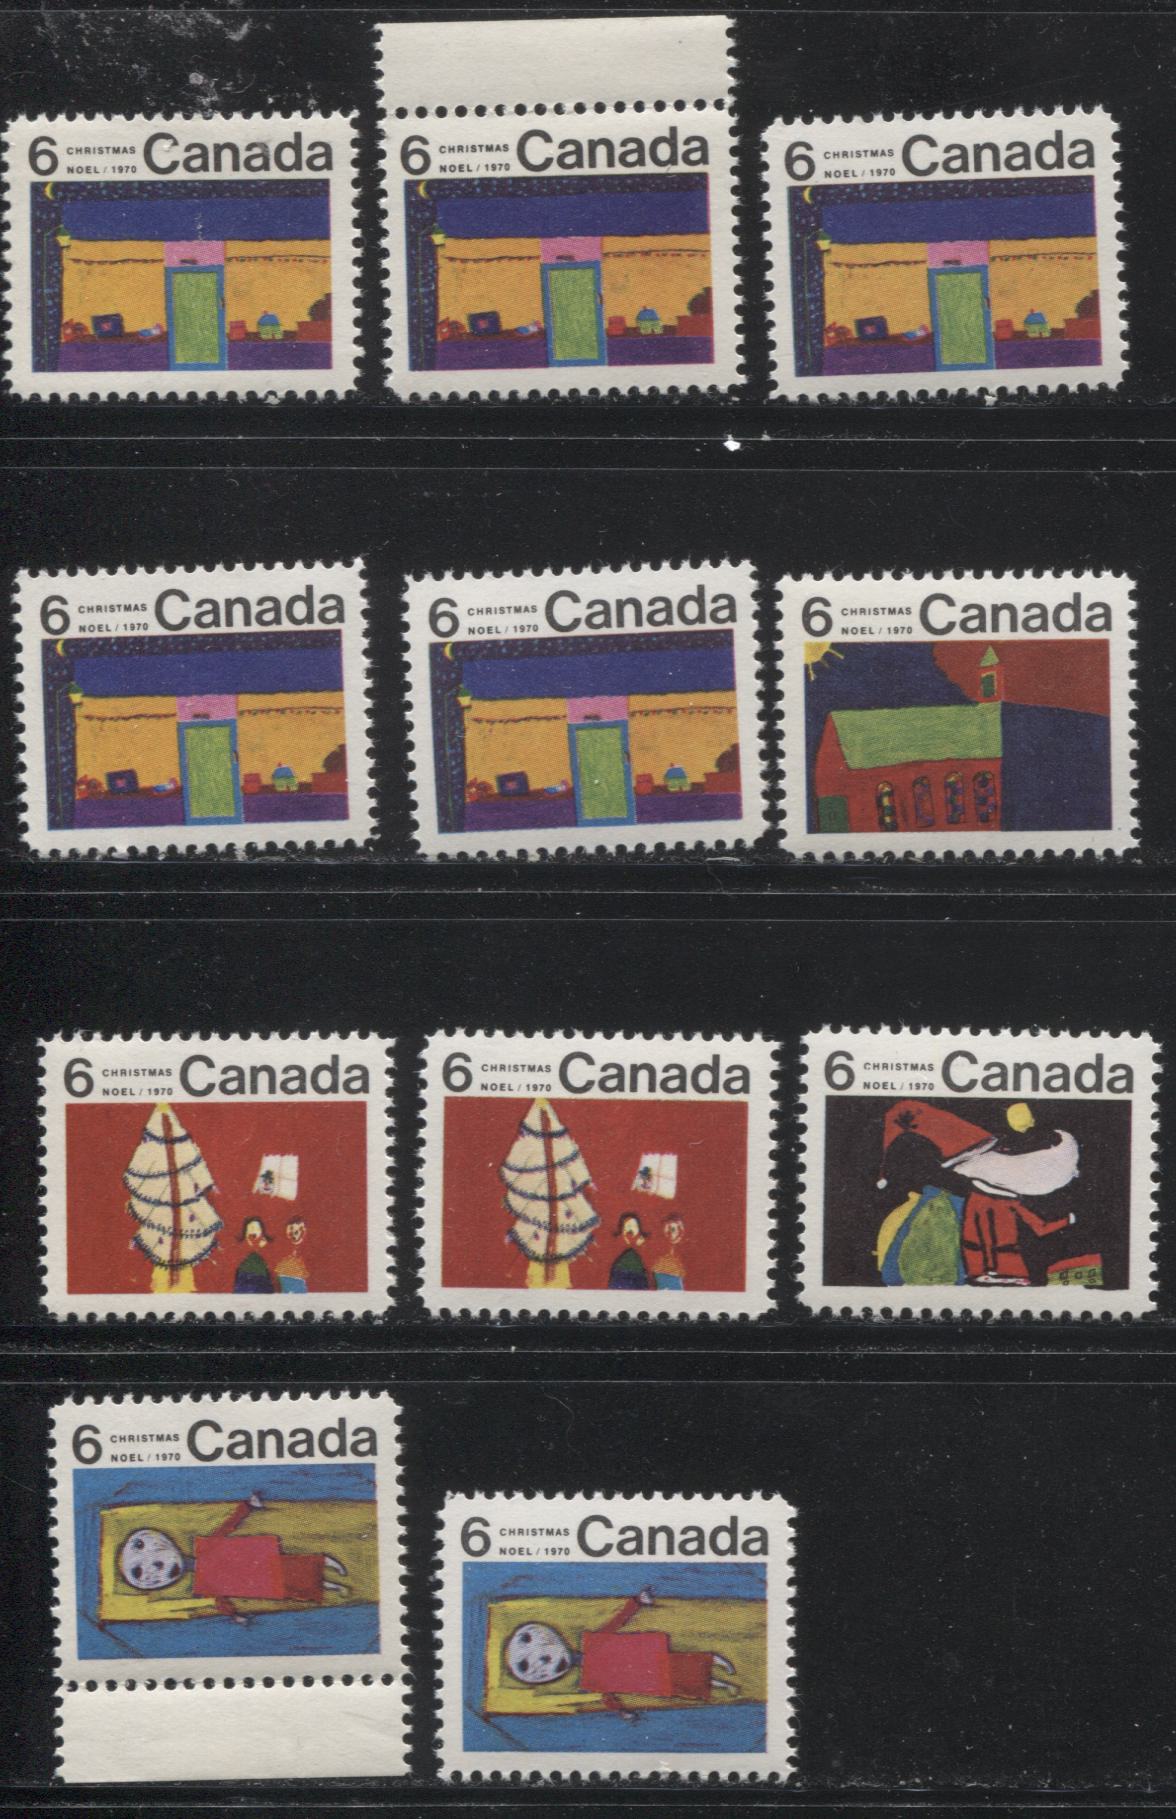 Lot 161 Canada #524-528 6c Multicoloured 1970 Christmas Issue, A Complete Set of 11 Constant Plate Varieties From Combination 2, Smooth HB11 Paper, Perf. 11.9 x 12